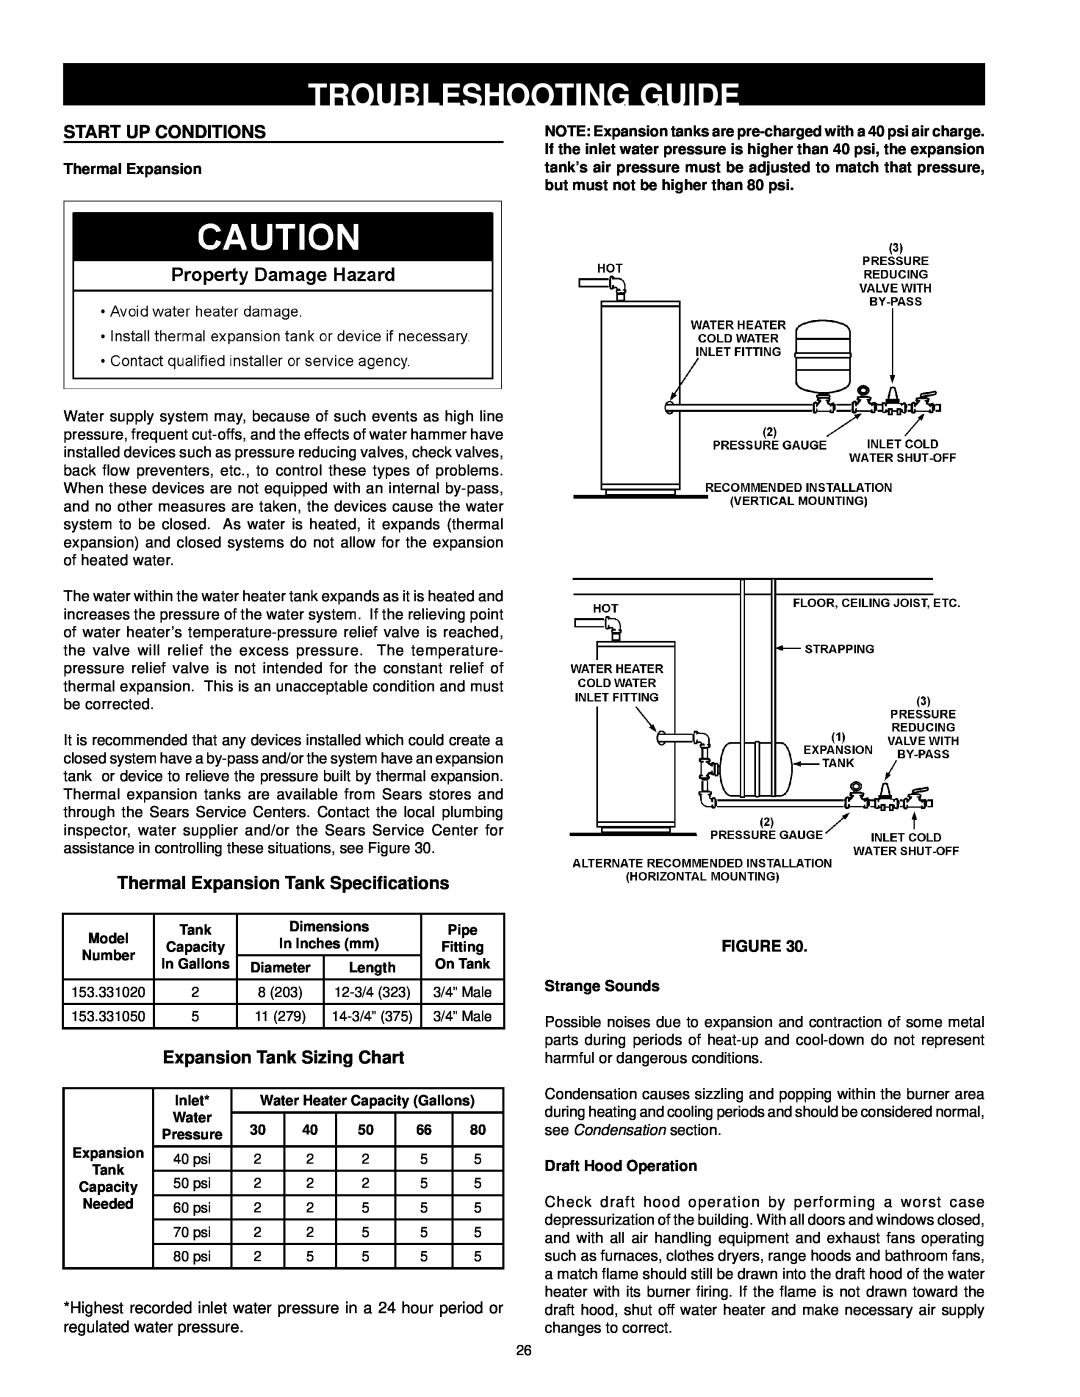 Kenmore 153.33385 owner manual Troubleshooting Guide, Start Up Conditions, Thermal Expansion Tank Speciﬁcations, Figure 